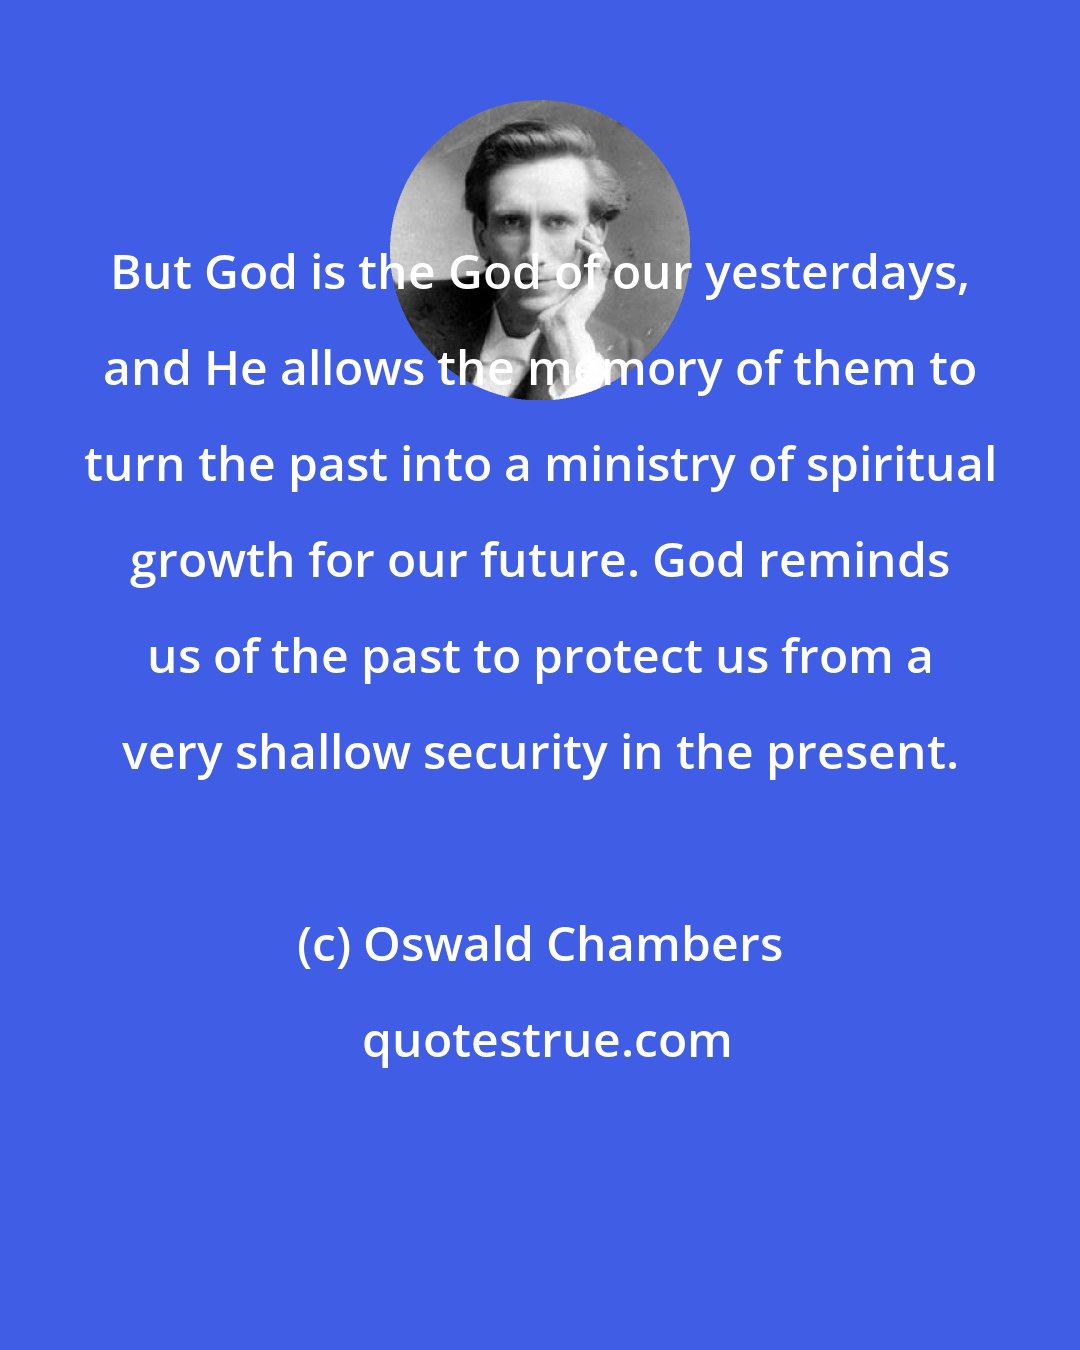 Oswald Chambers: But God is the God of our yesterdays, and He allows the memory of them to turn the past into a ministry of spiritual growth for our future. God reminds us of the past to protect us from a very shallow security in the present.